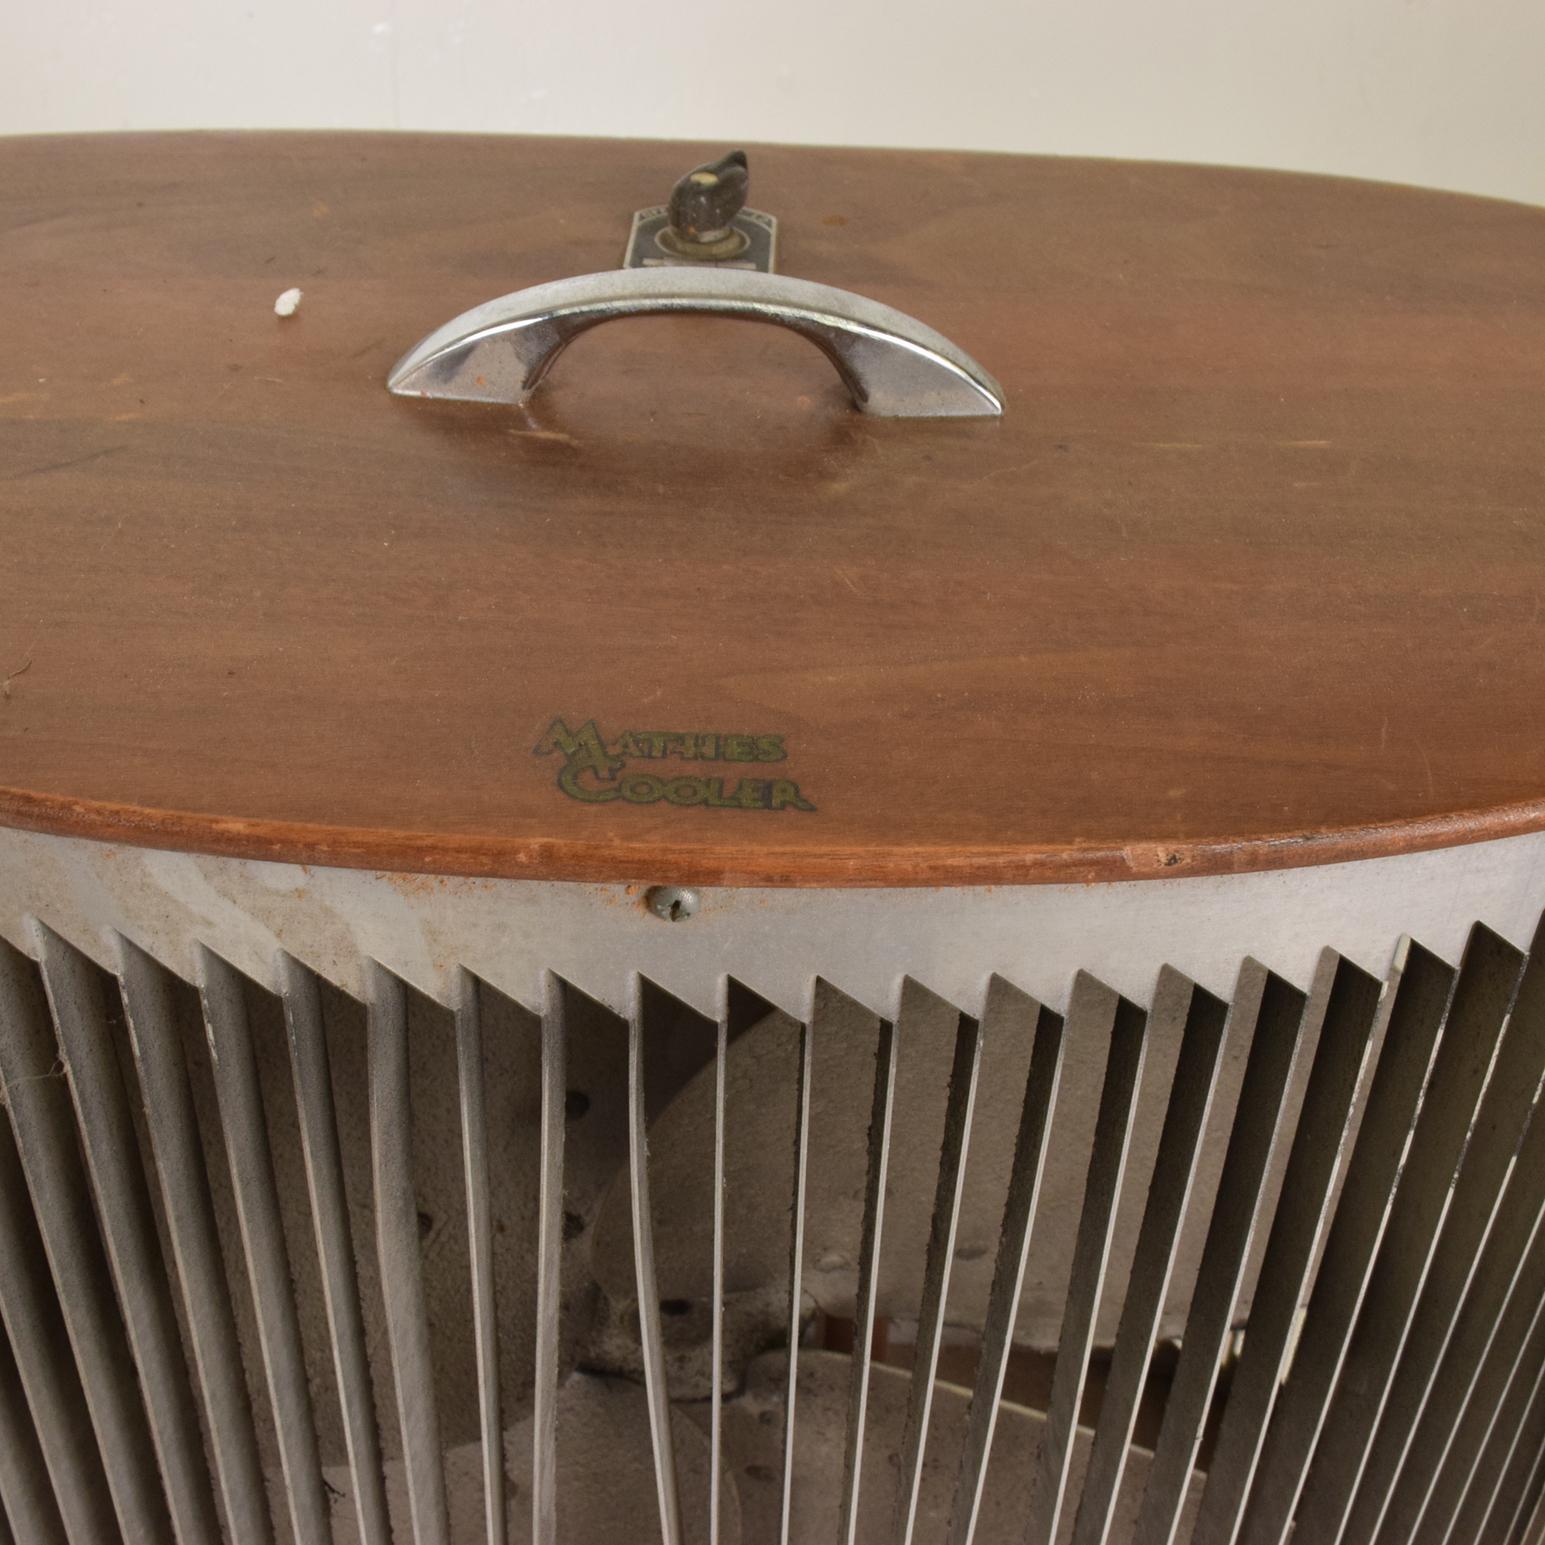 For your consideration, a Mid-Century Modern electric fan Mathes cooler vintage decorative.

Made in the USA, circa 1960s. 
Walnut wood with aluminum frame.